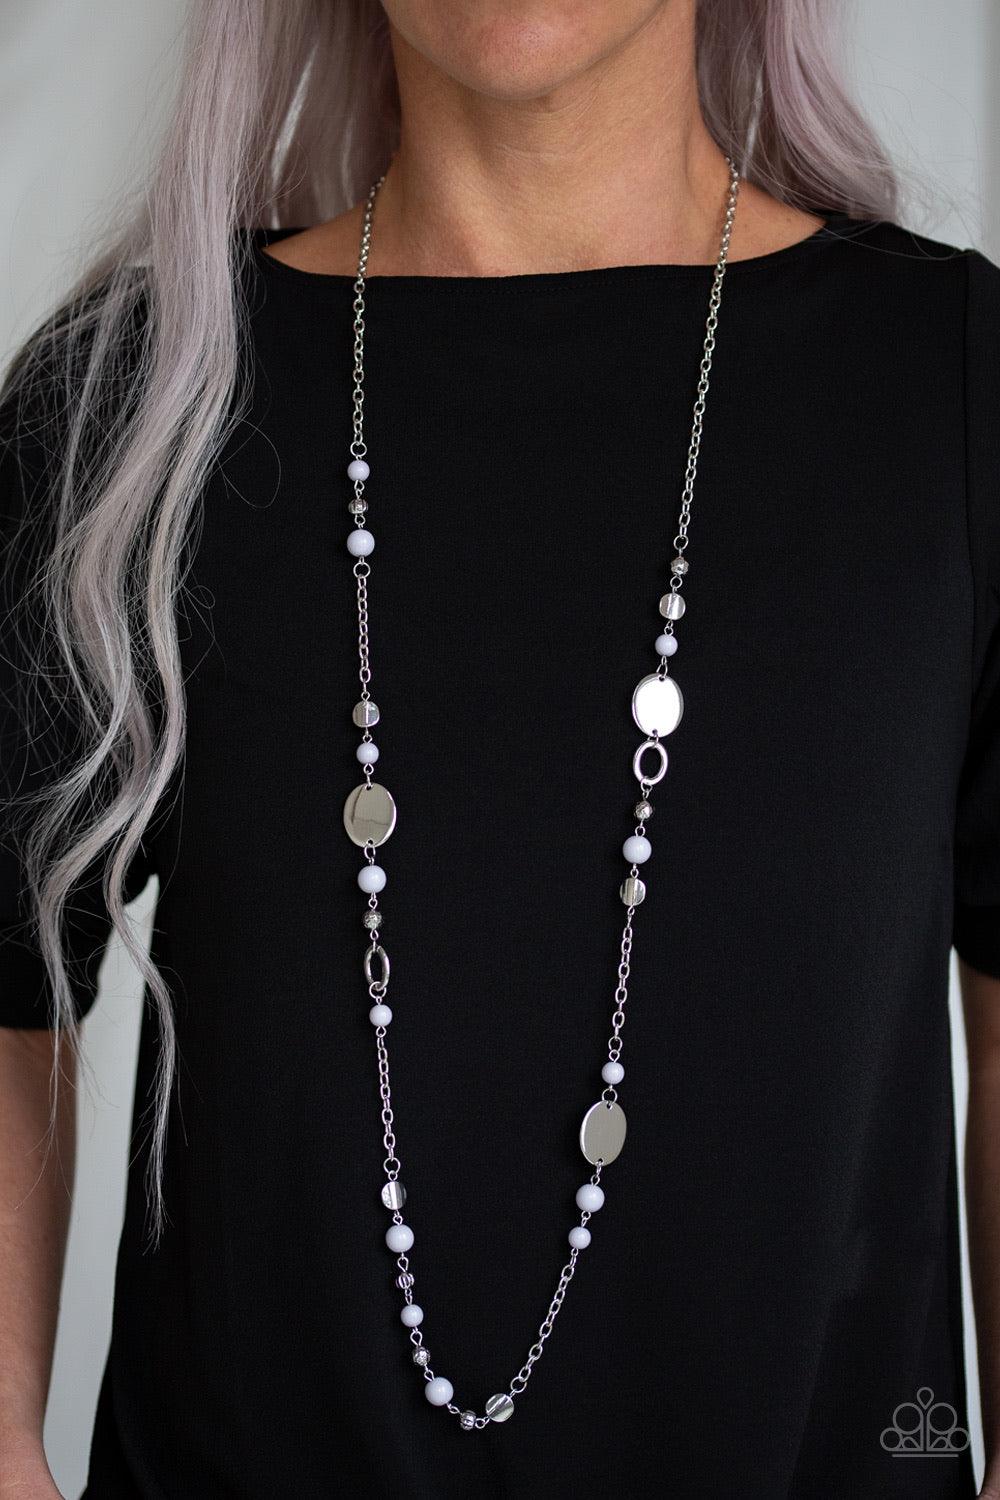 Paparazzi Accessories Serenely Springtime None - Silver An array of polished gray beads, silver discs, and ornate silver accents trickles along a shimmery silver chain for a whimsical look. Features an adjustable clasp closure. Sold as one individual neck